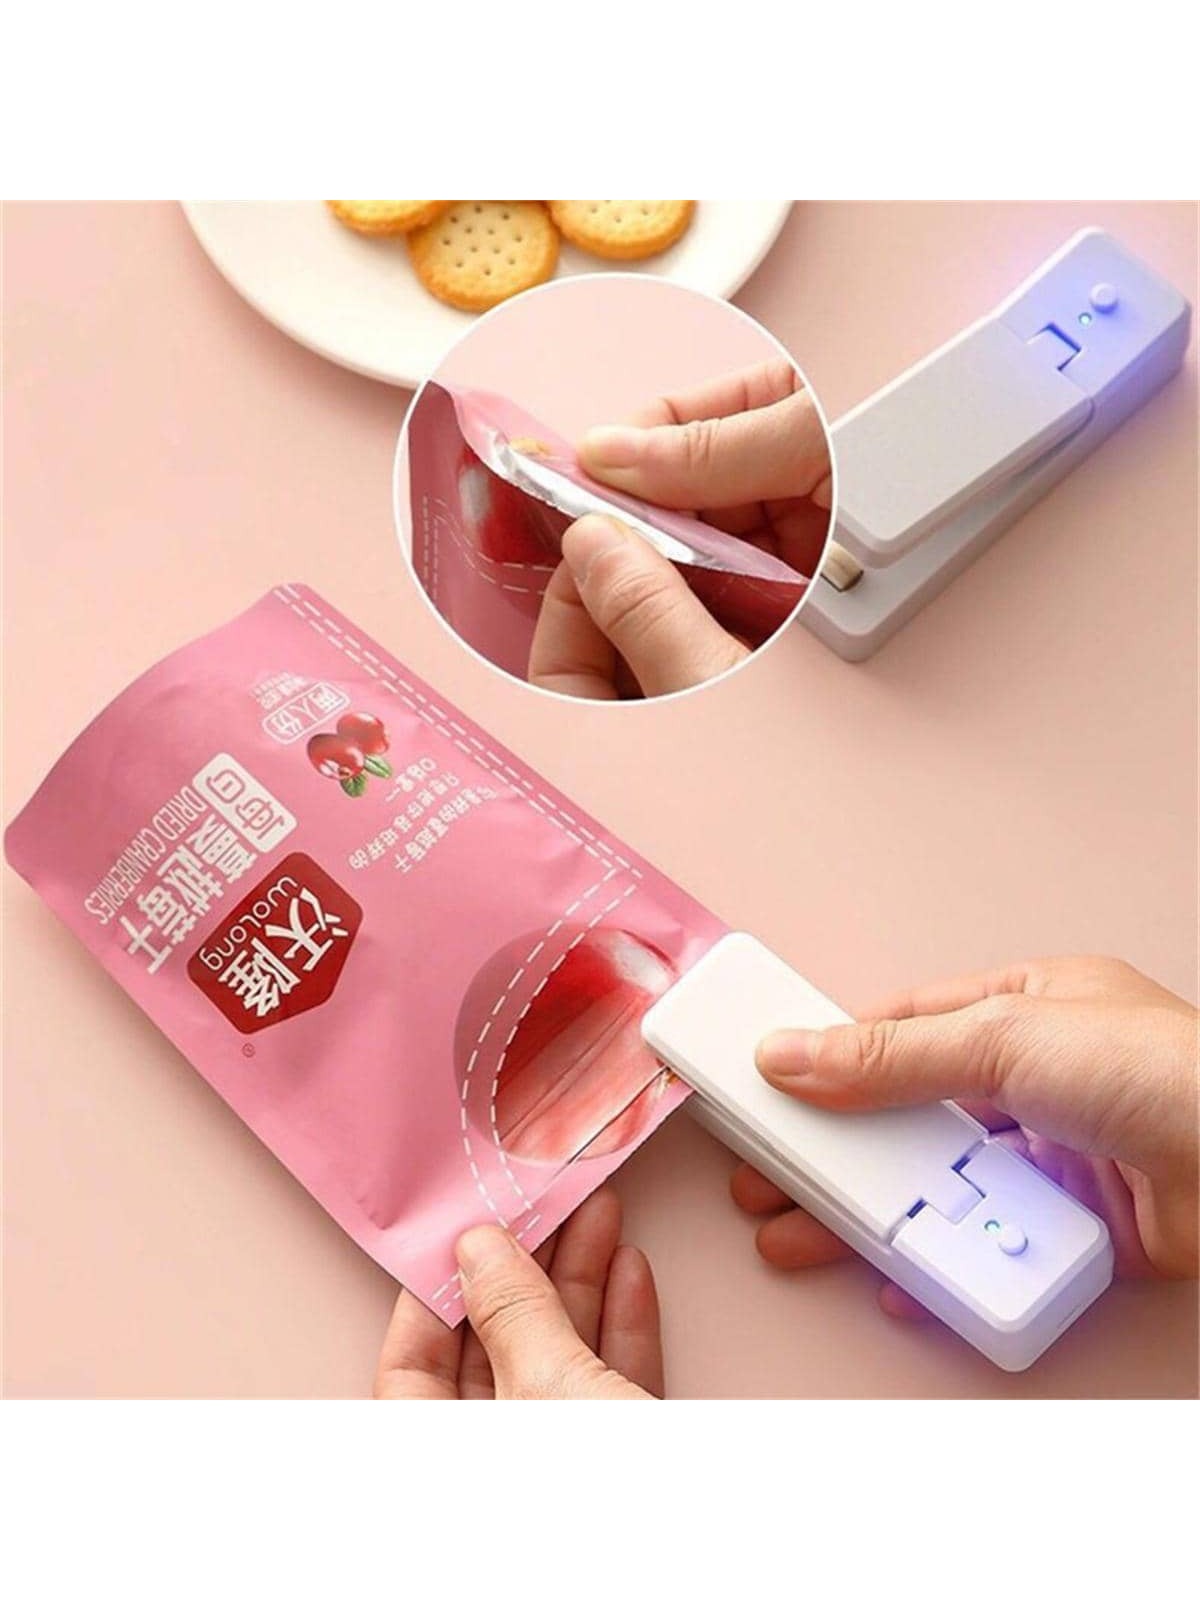 1pc Mini Plastic Vacuum Food Sealer, Modern White Rechargeable Kitchen Appliance For Home